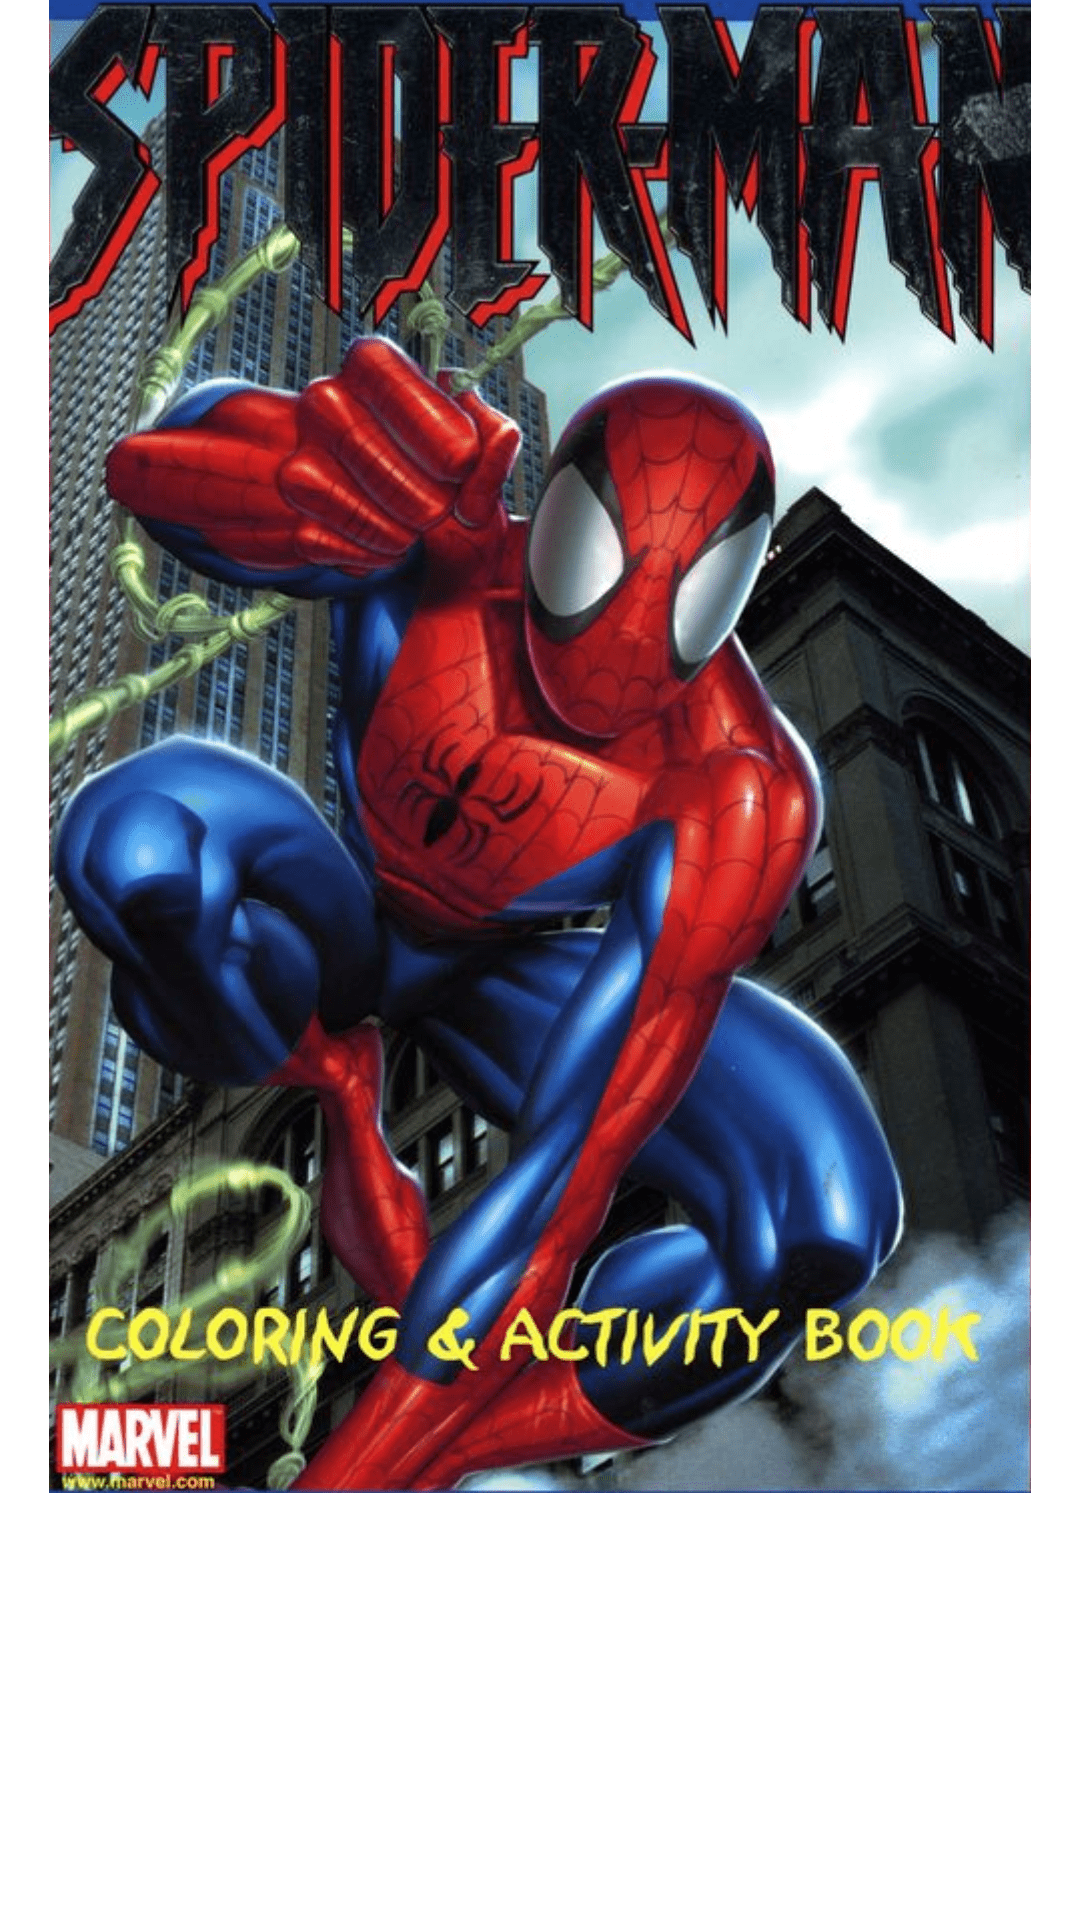 Spider-man Coloring and Activity Book